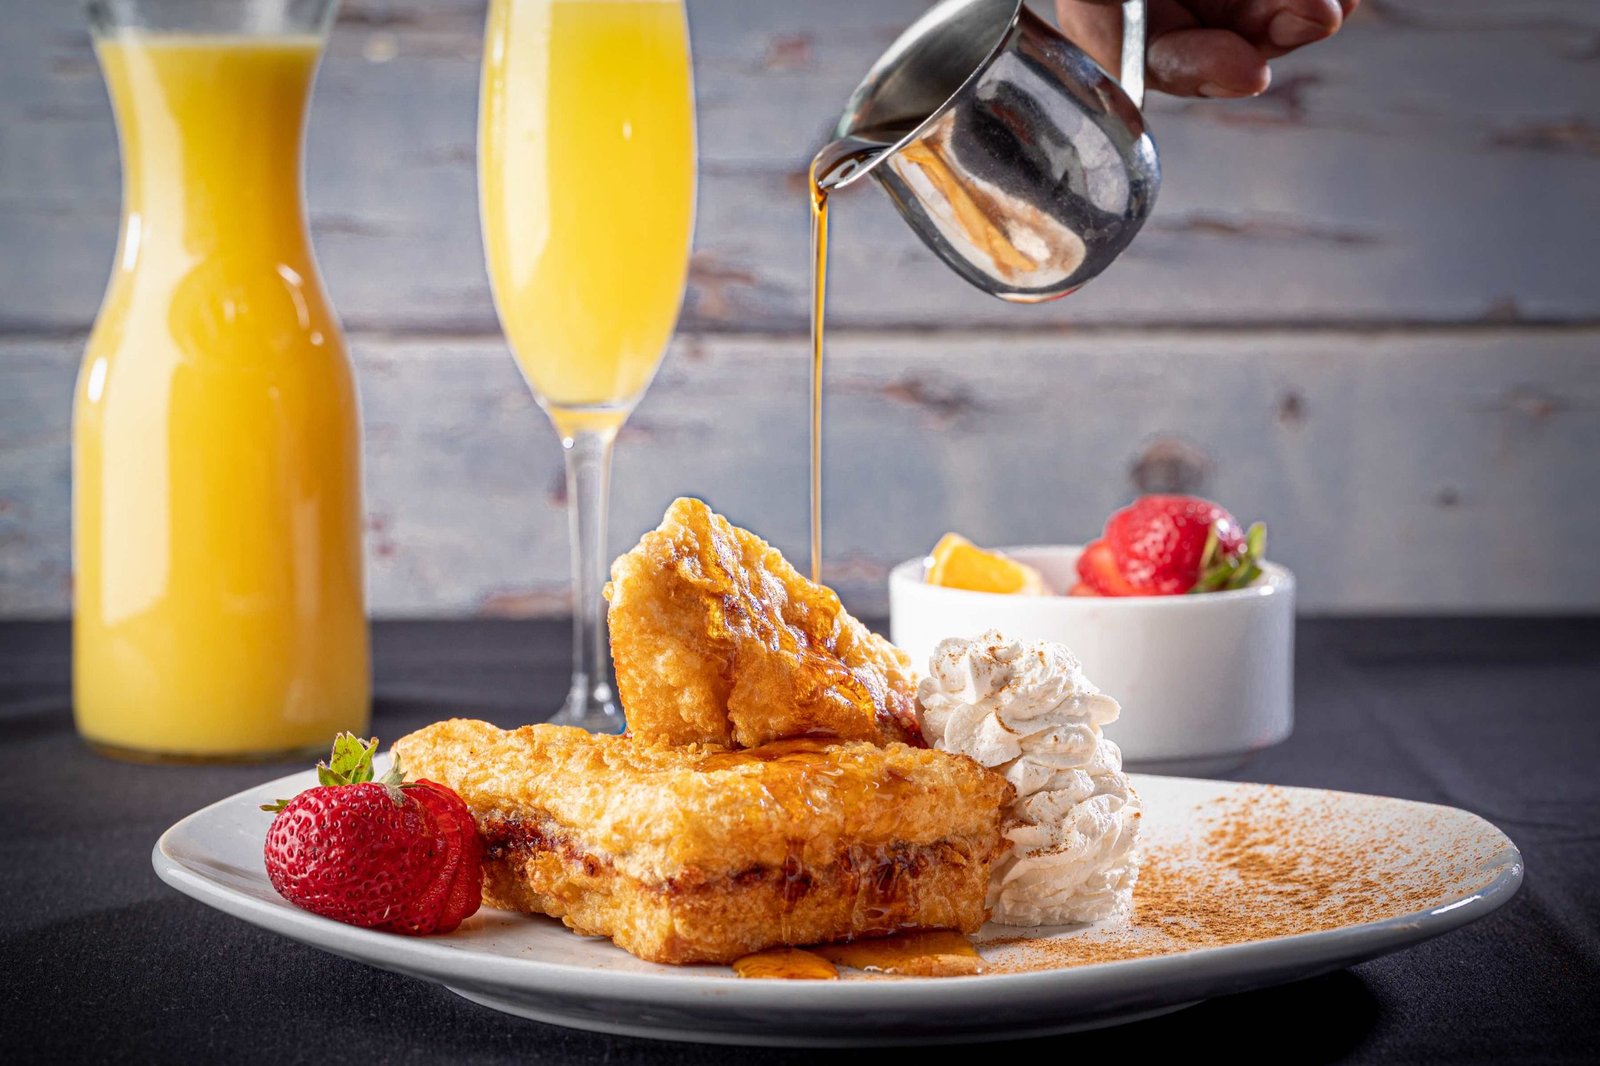 Stuffed French Toast with Fresh Fruit, Syrup, Whipped Cream, Powdered Sugar and a Mimosa.